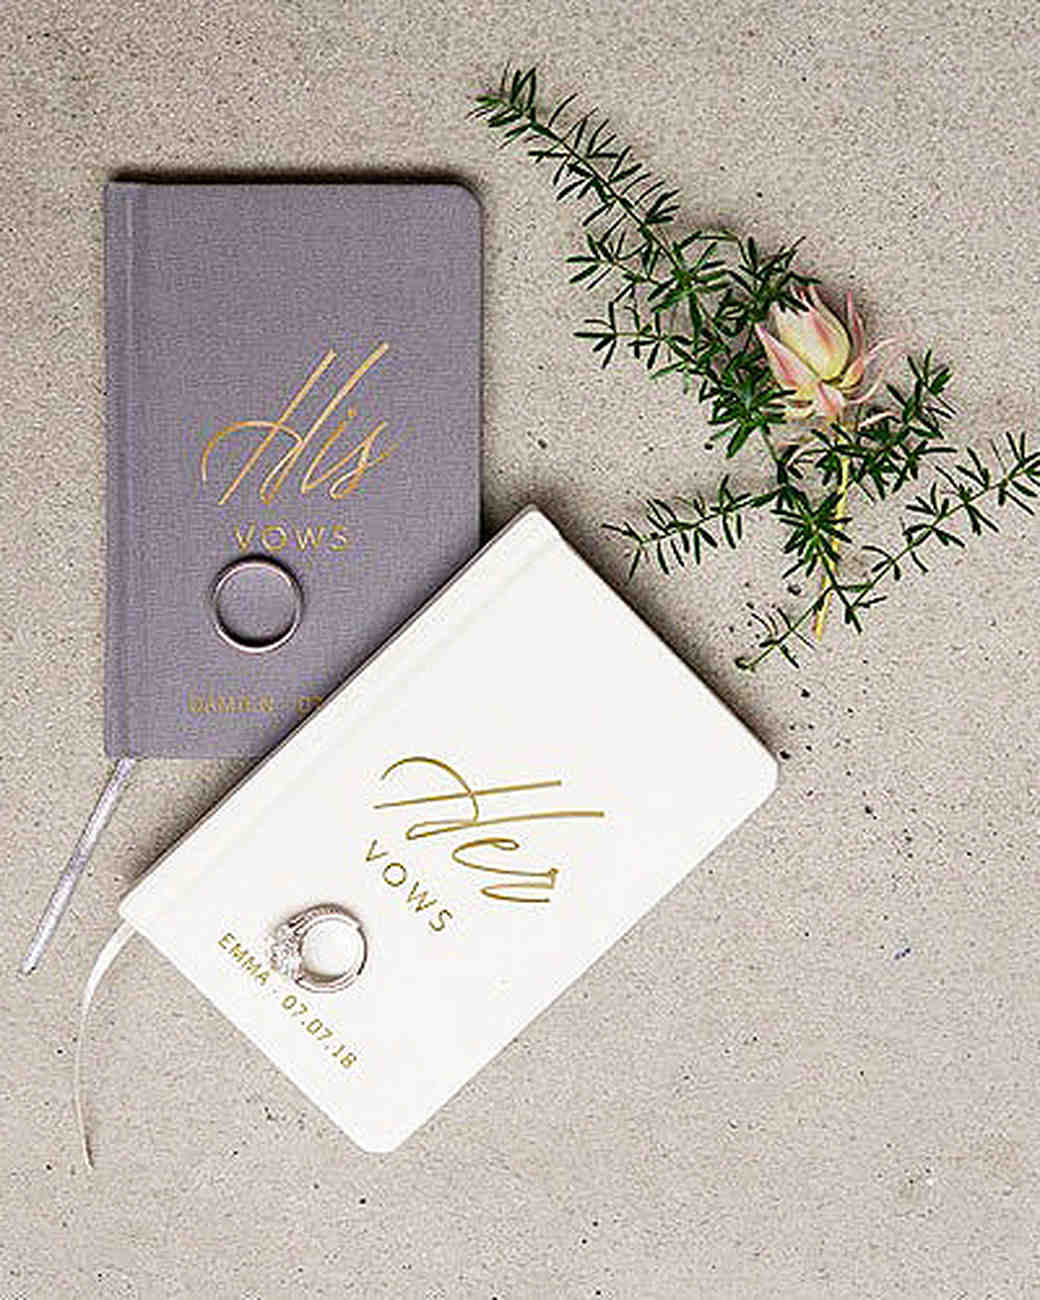 Wedding-vow-journal-beau-coup-his-hers-0716_vert